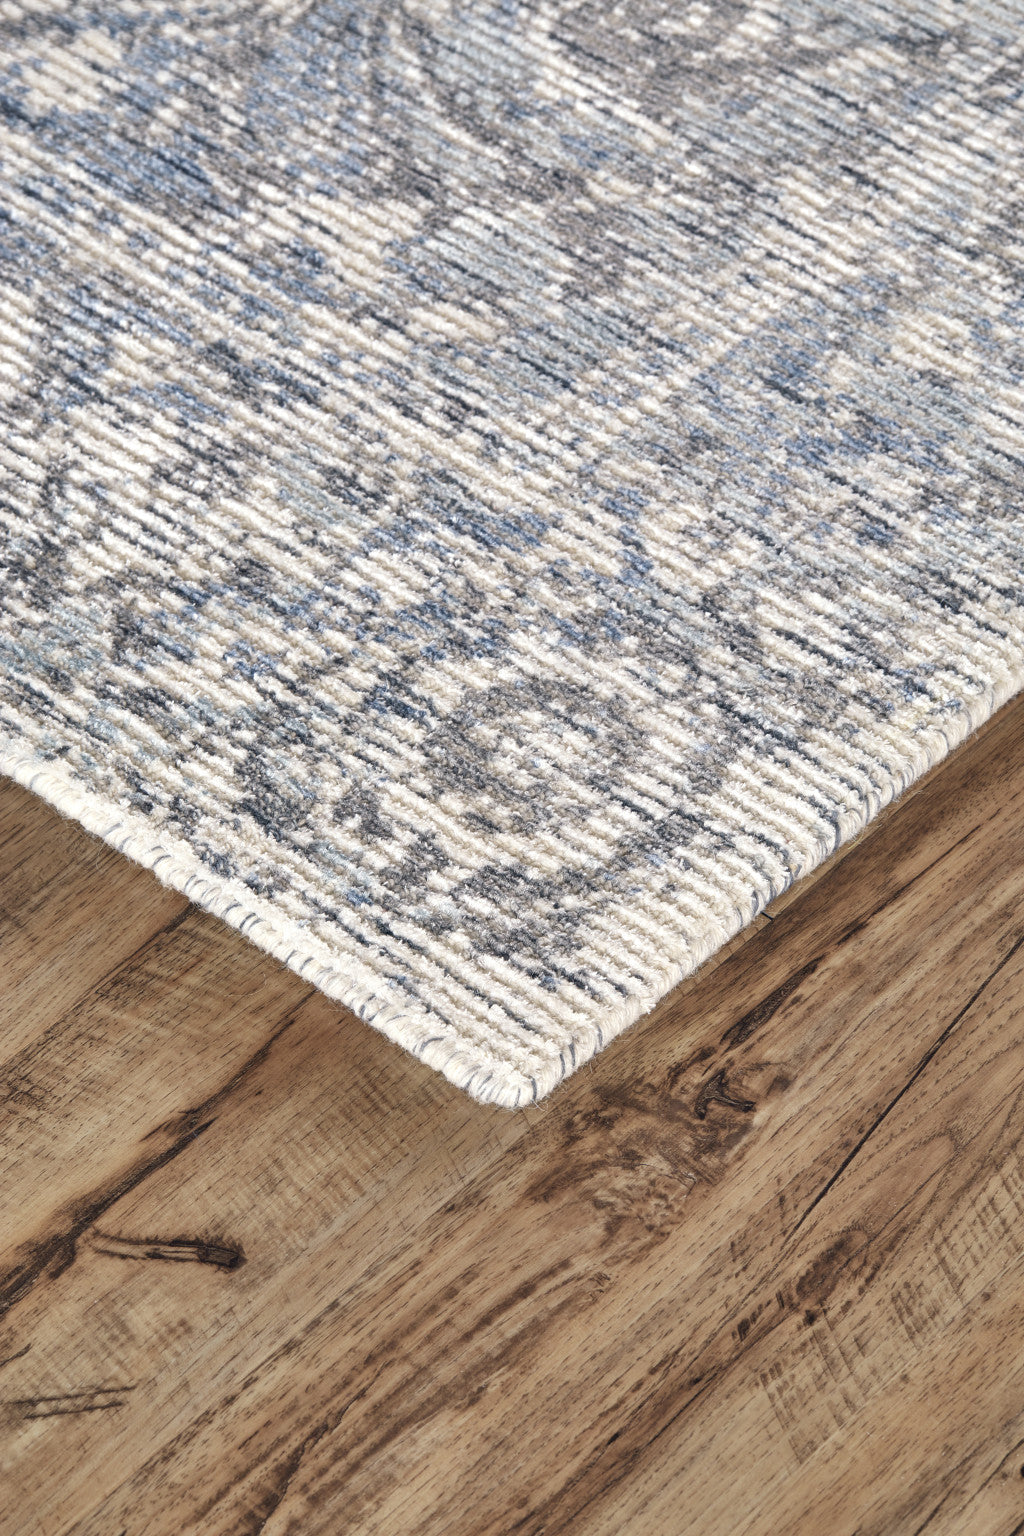 8' X 11' Blue Ivory And Gray Abstract Hand Woven Area Rug